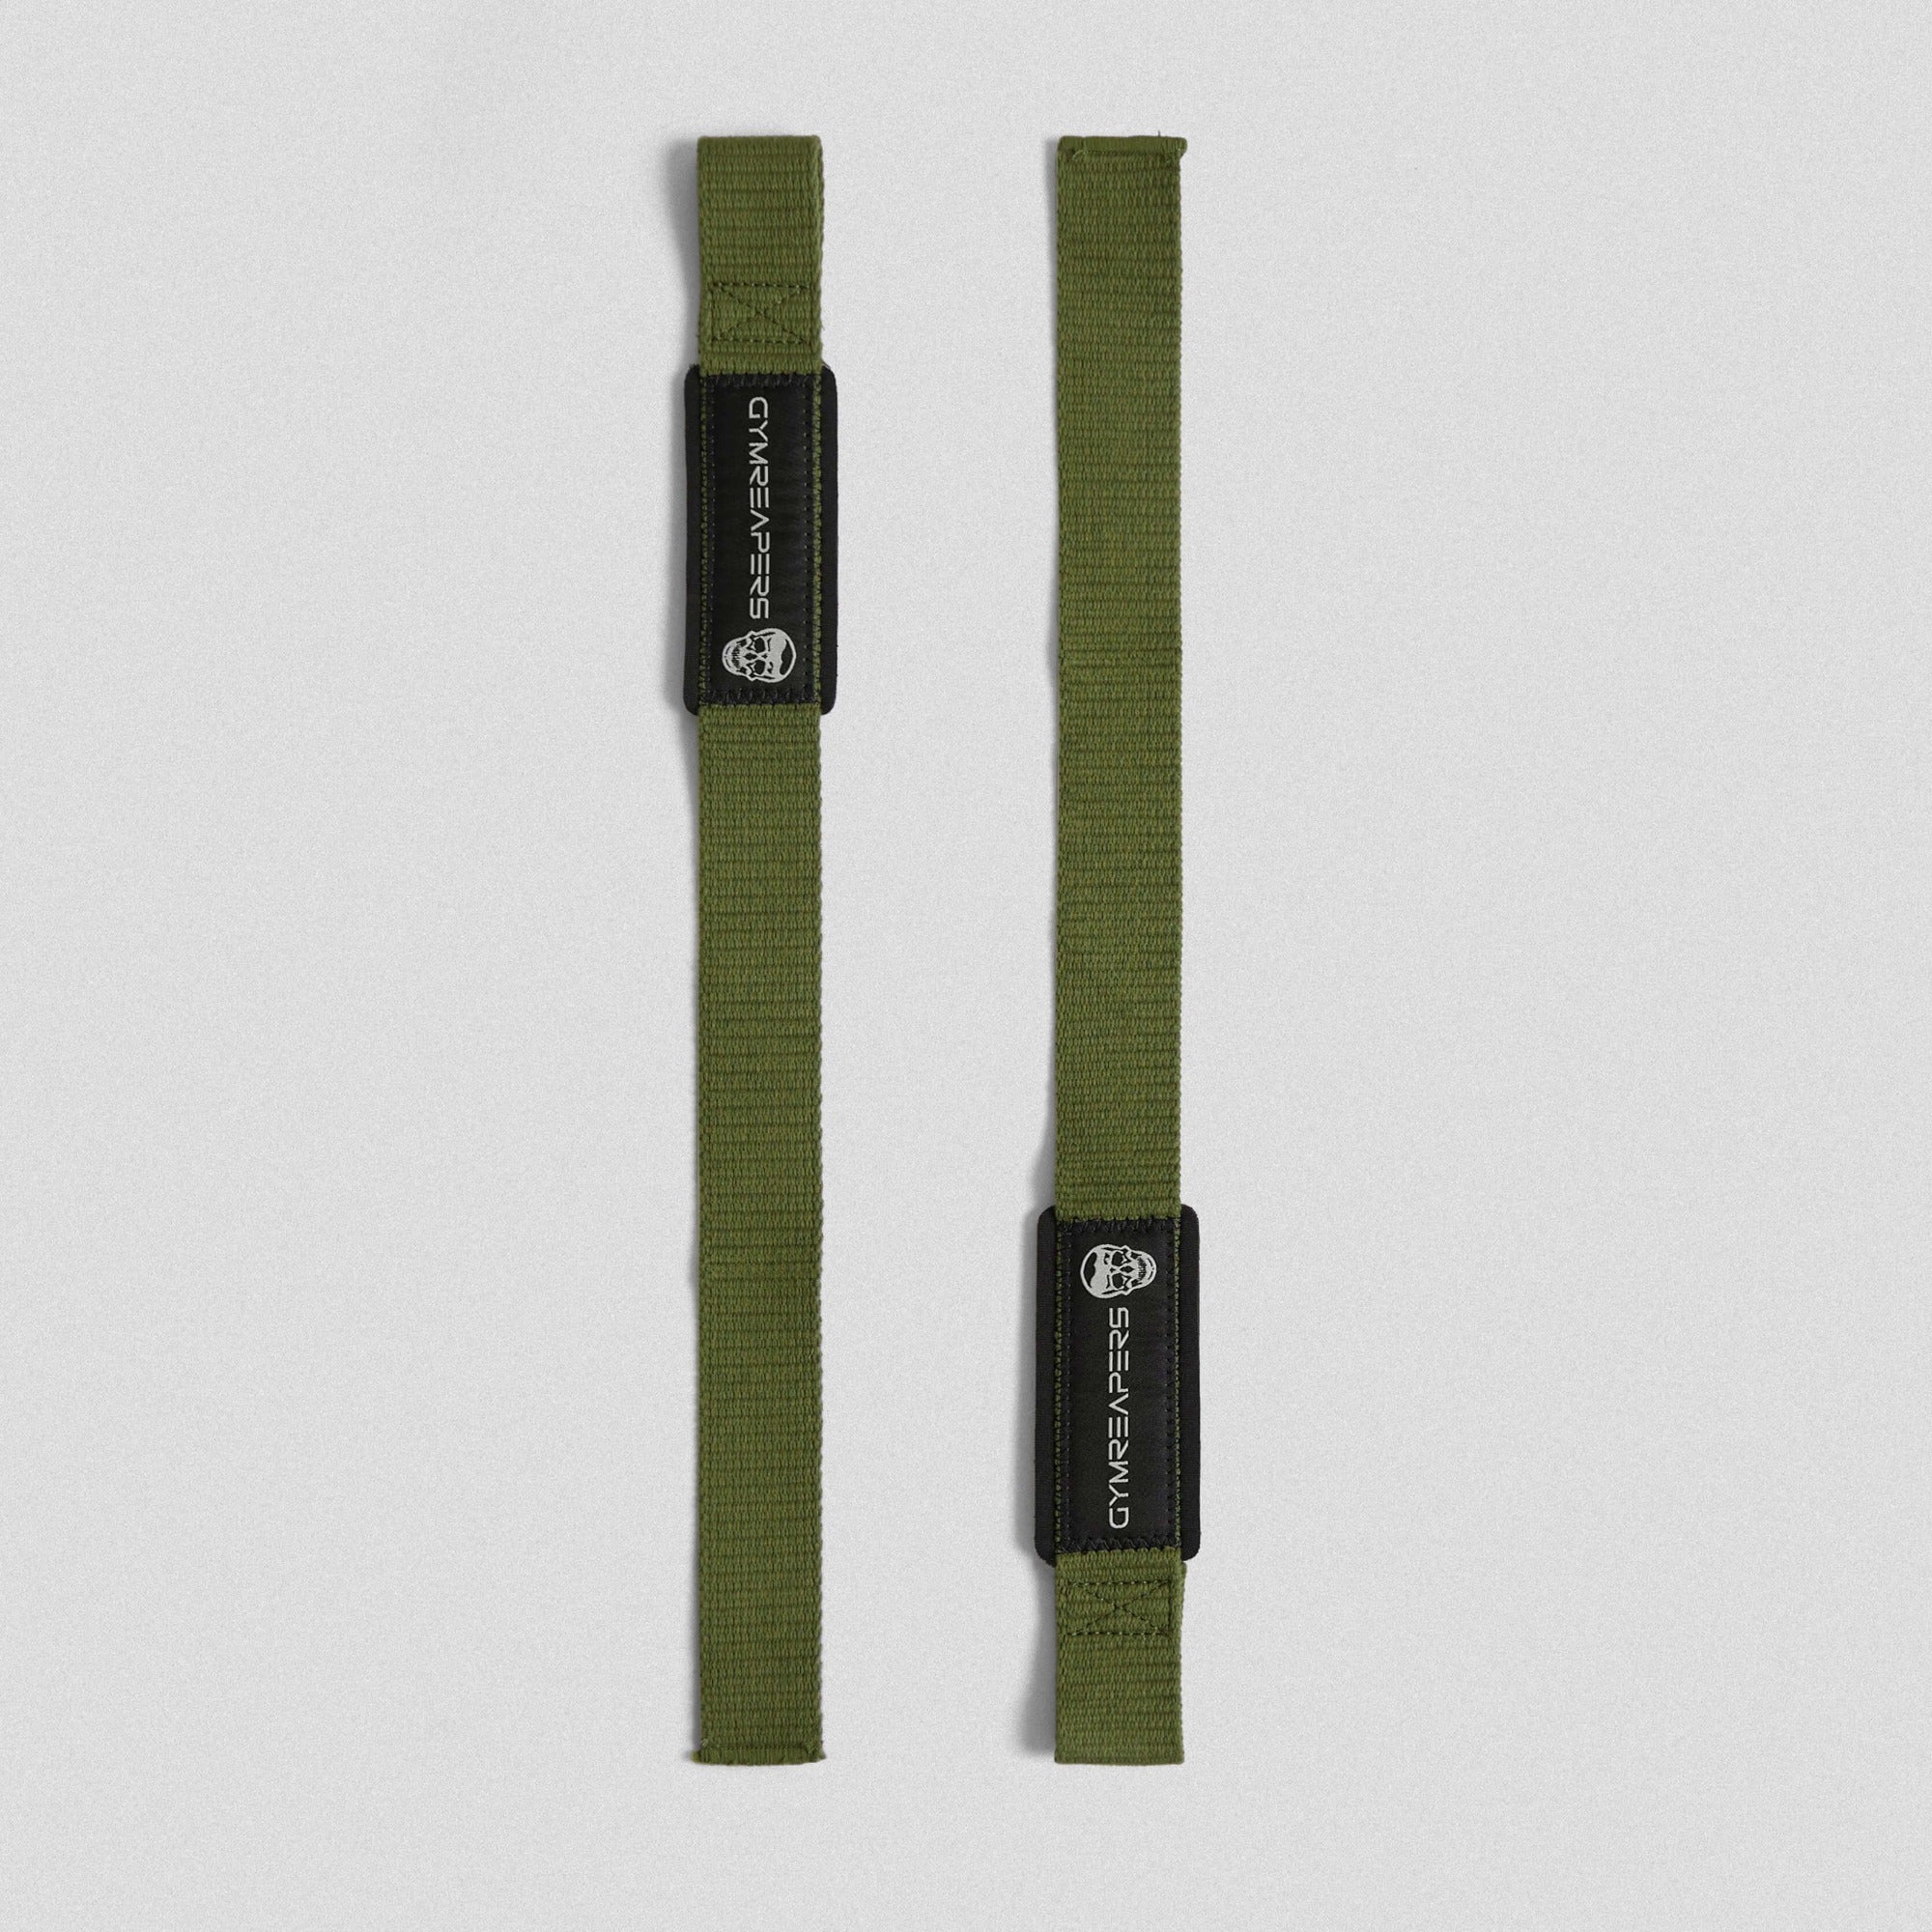 Lifting Straps  Premium Padded Weightlifting Straps - Green